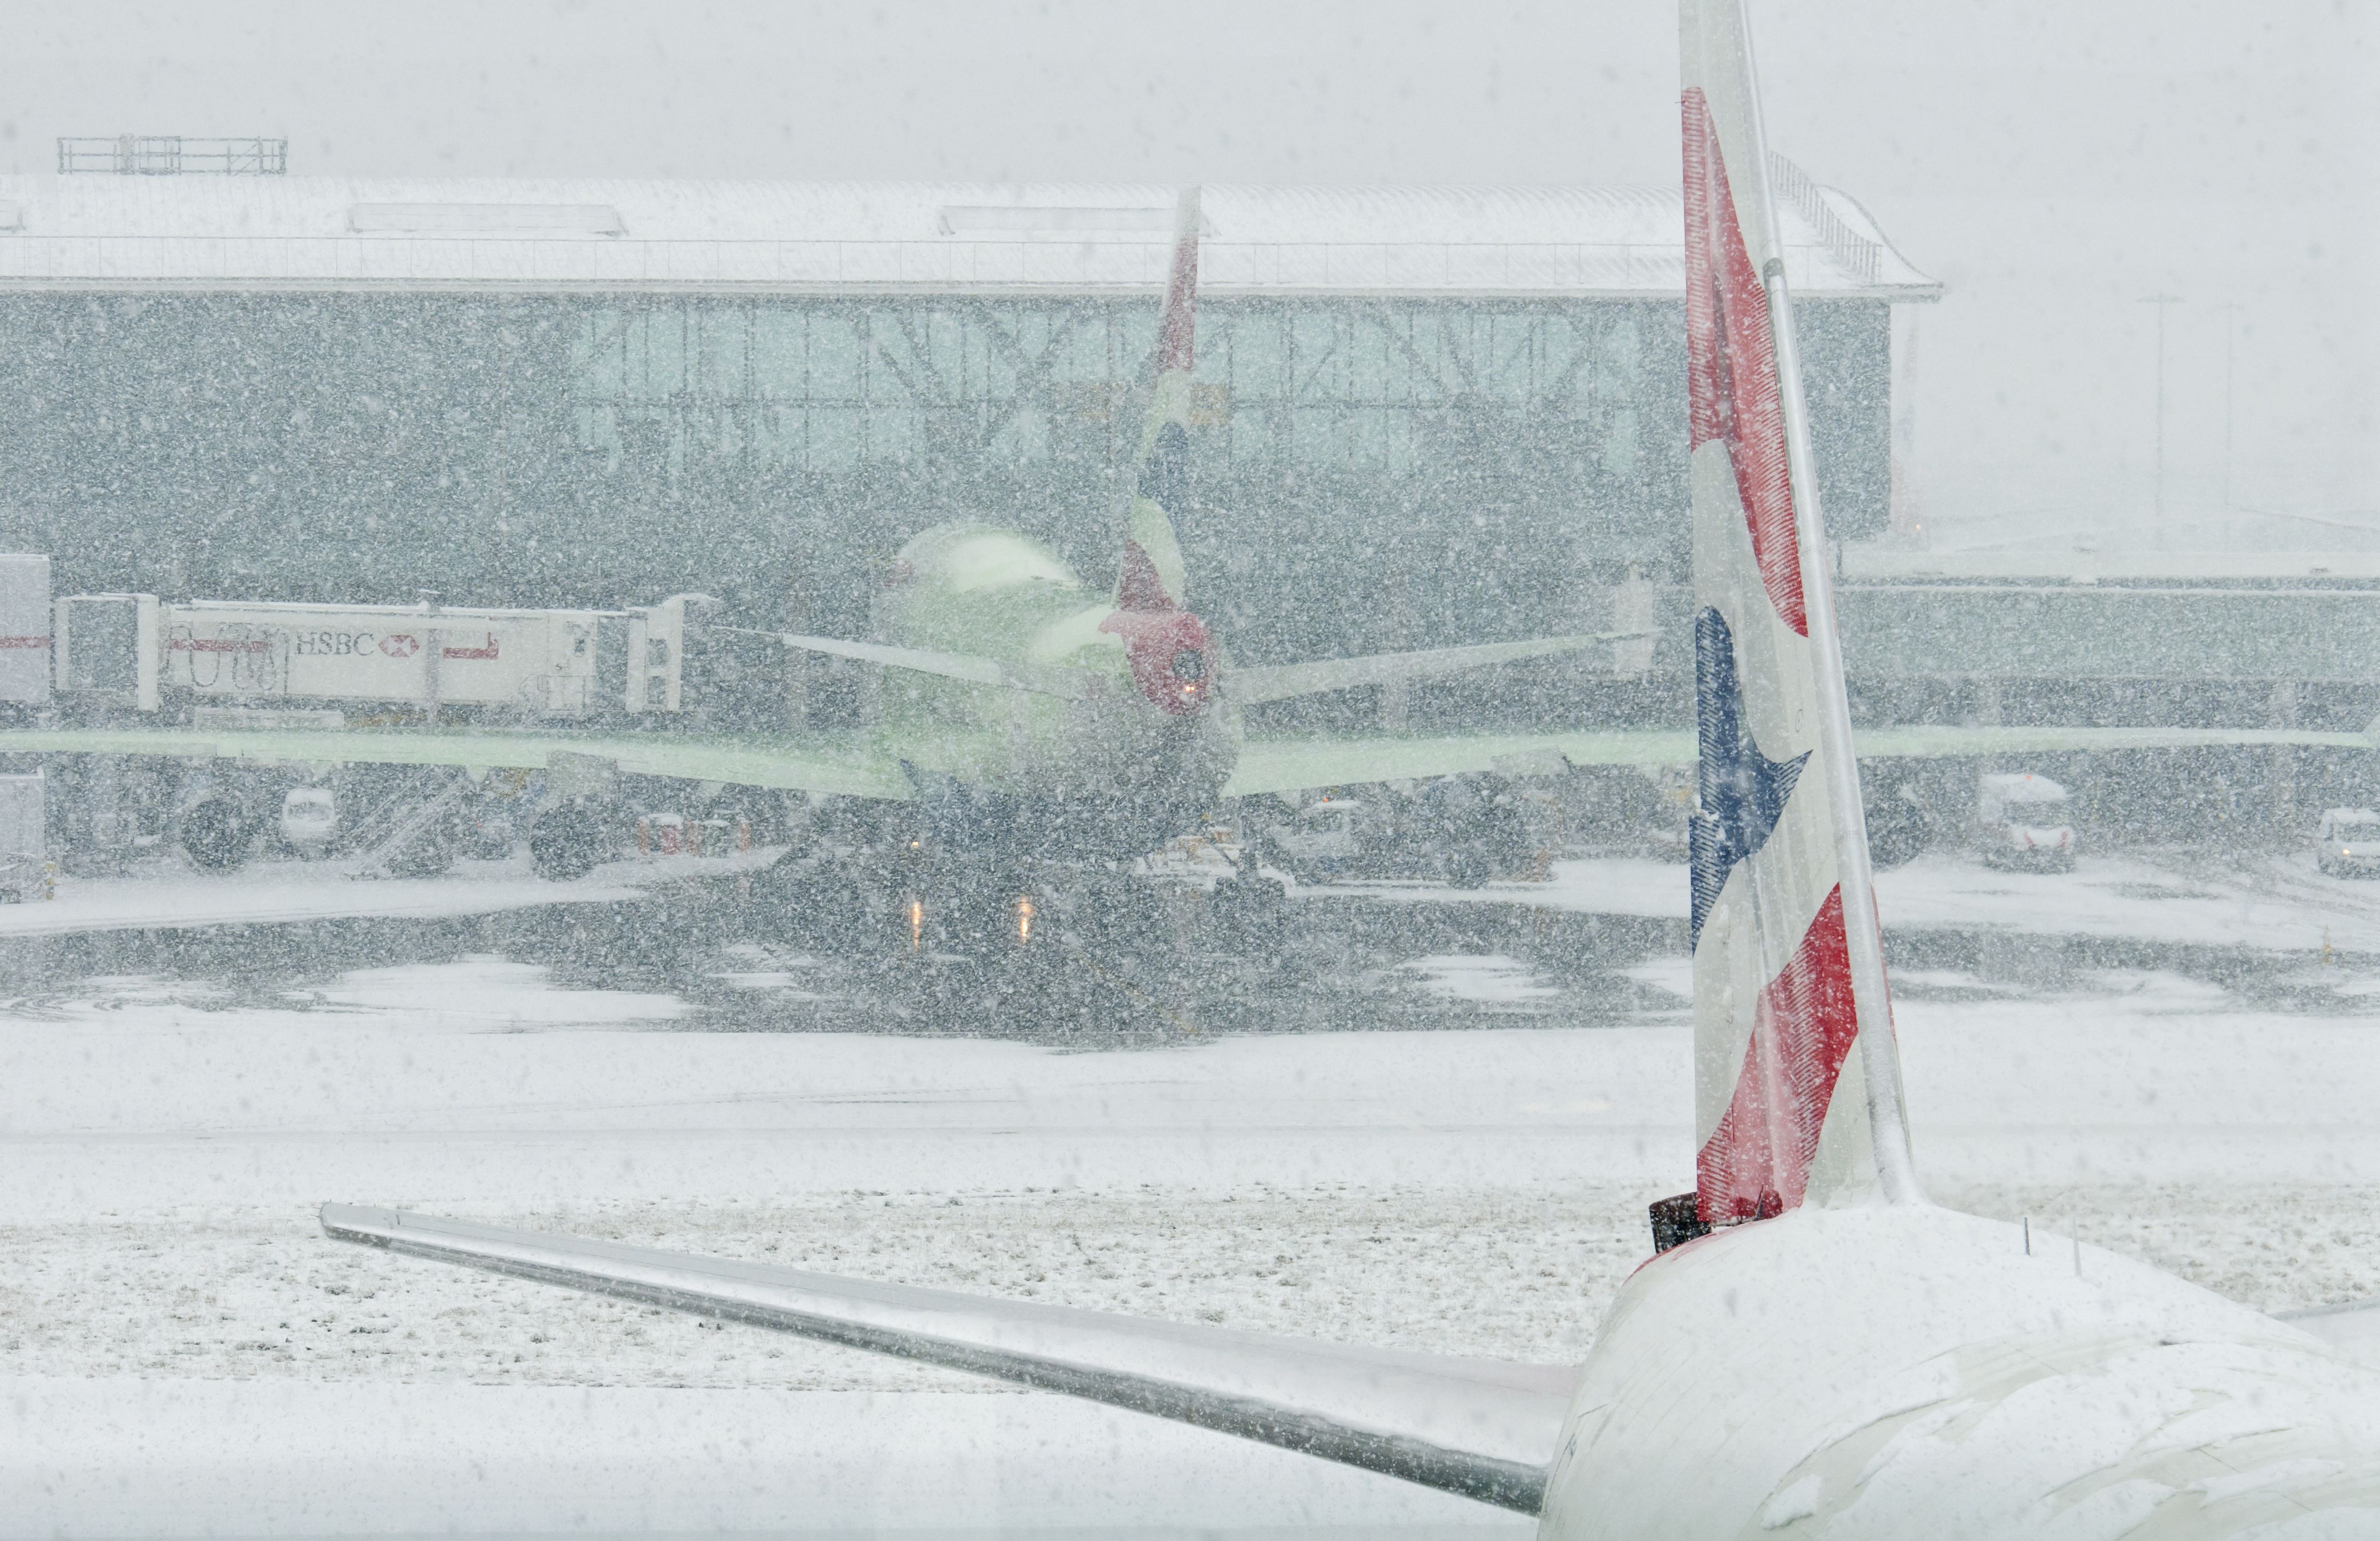 Two British Airways aircraft parked at London Heathrow on a snowy day.